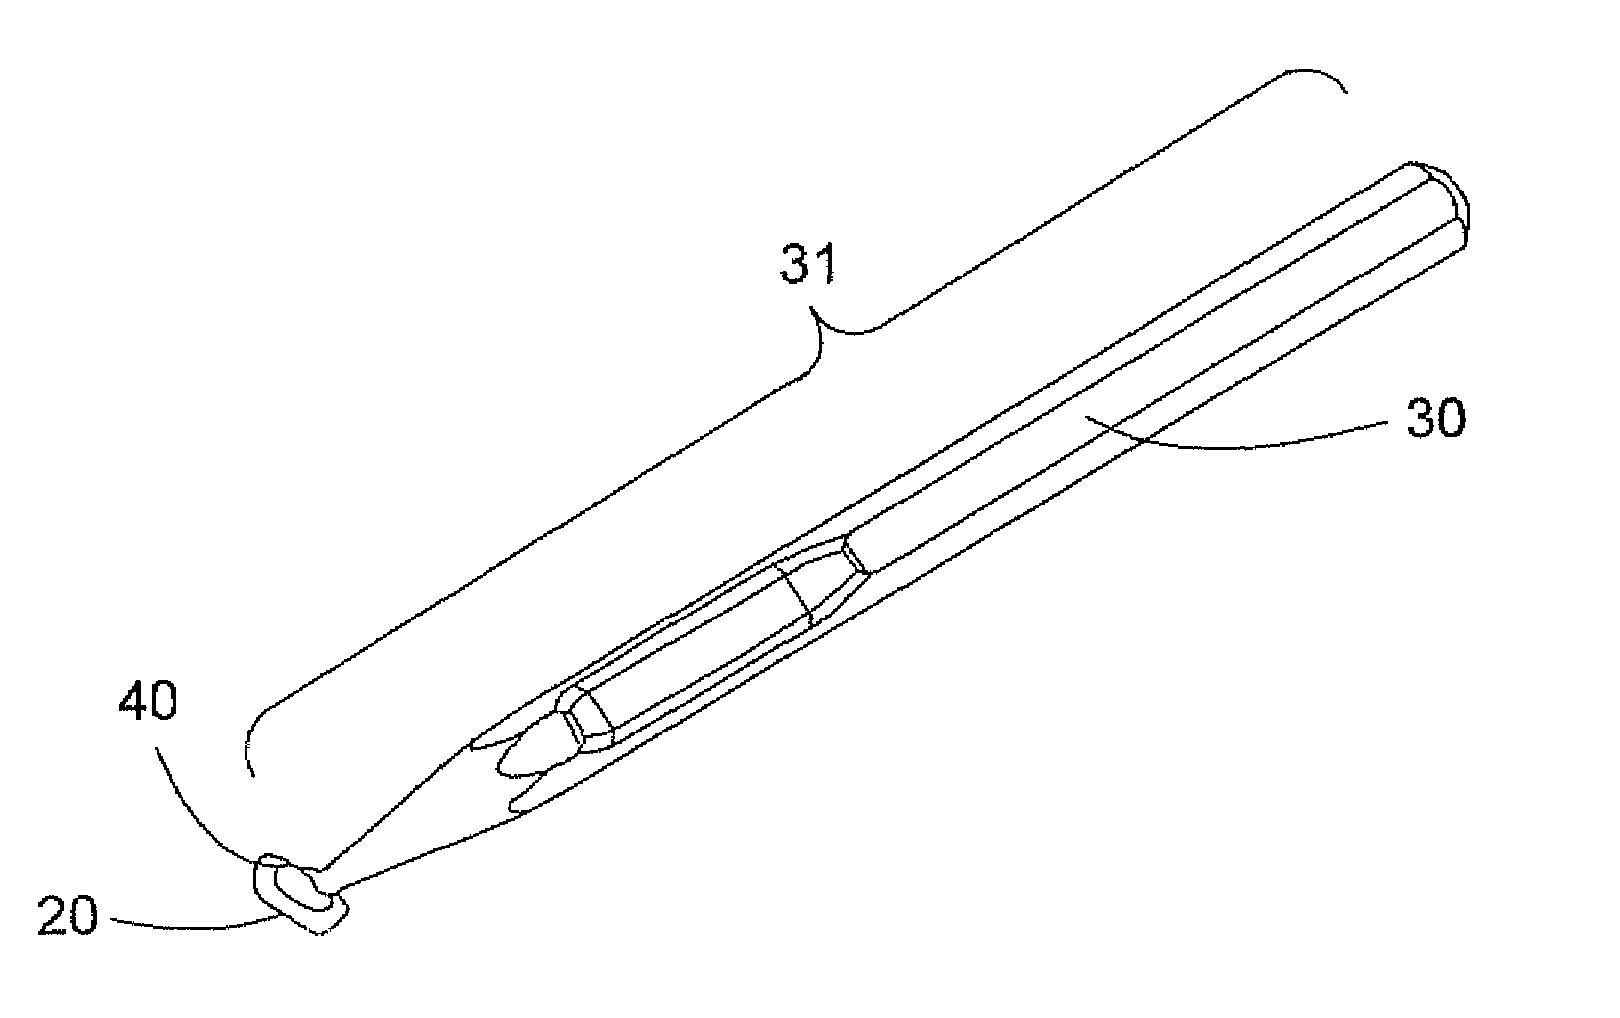 Instrument And Method For Scrubbing The Corneal Epithelium